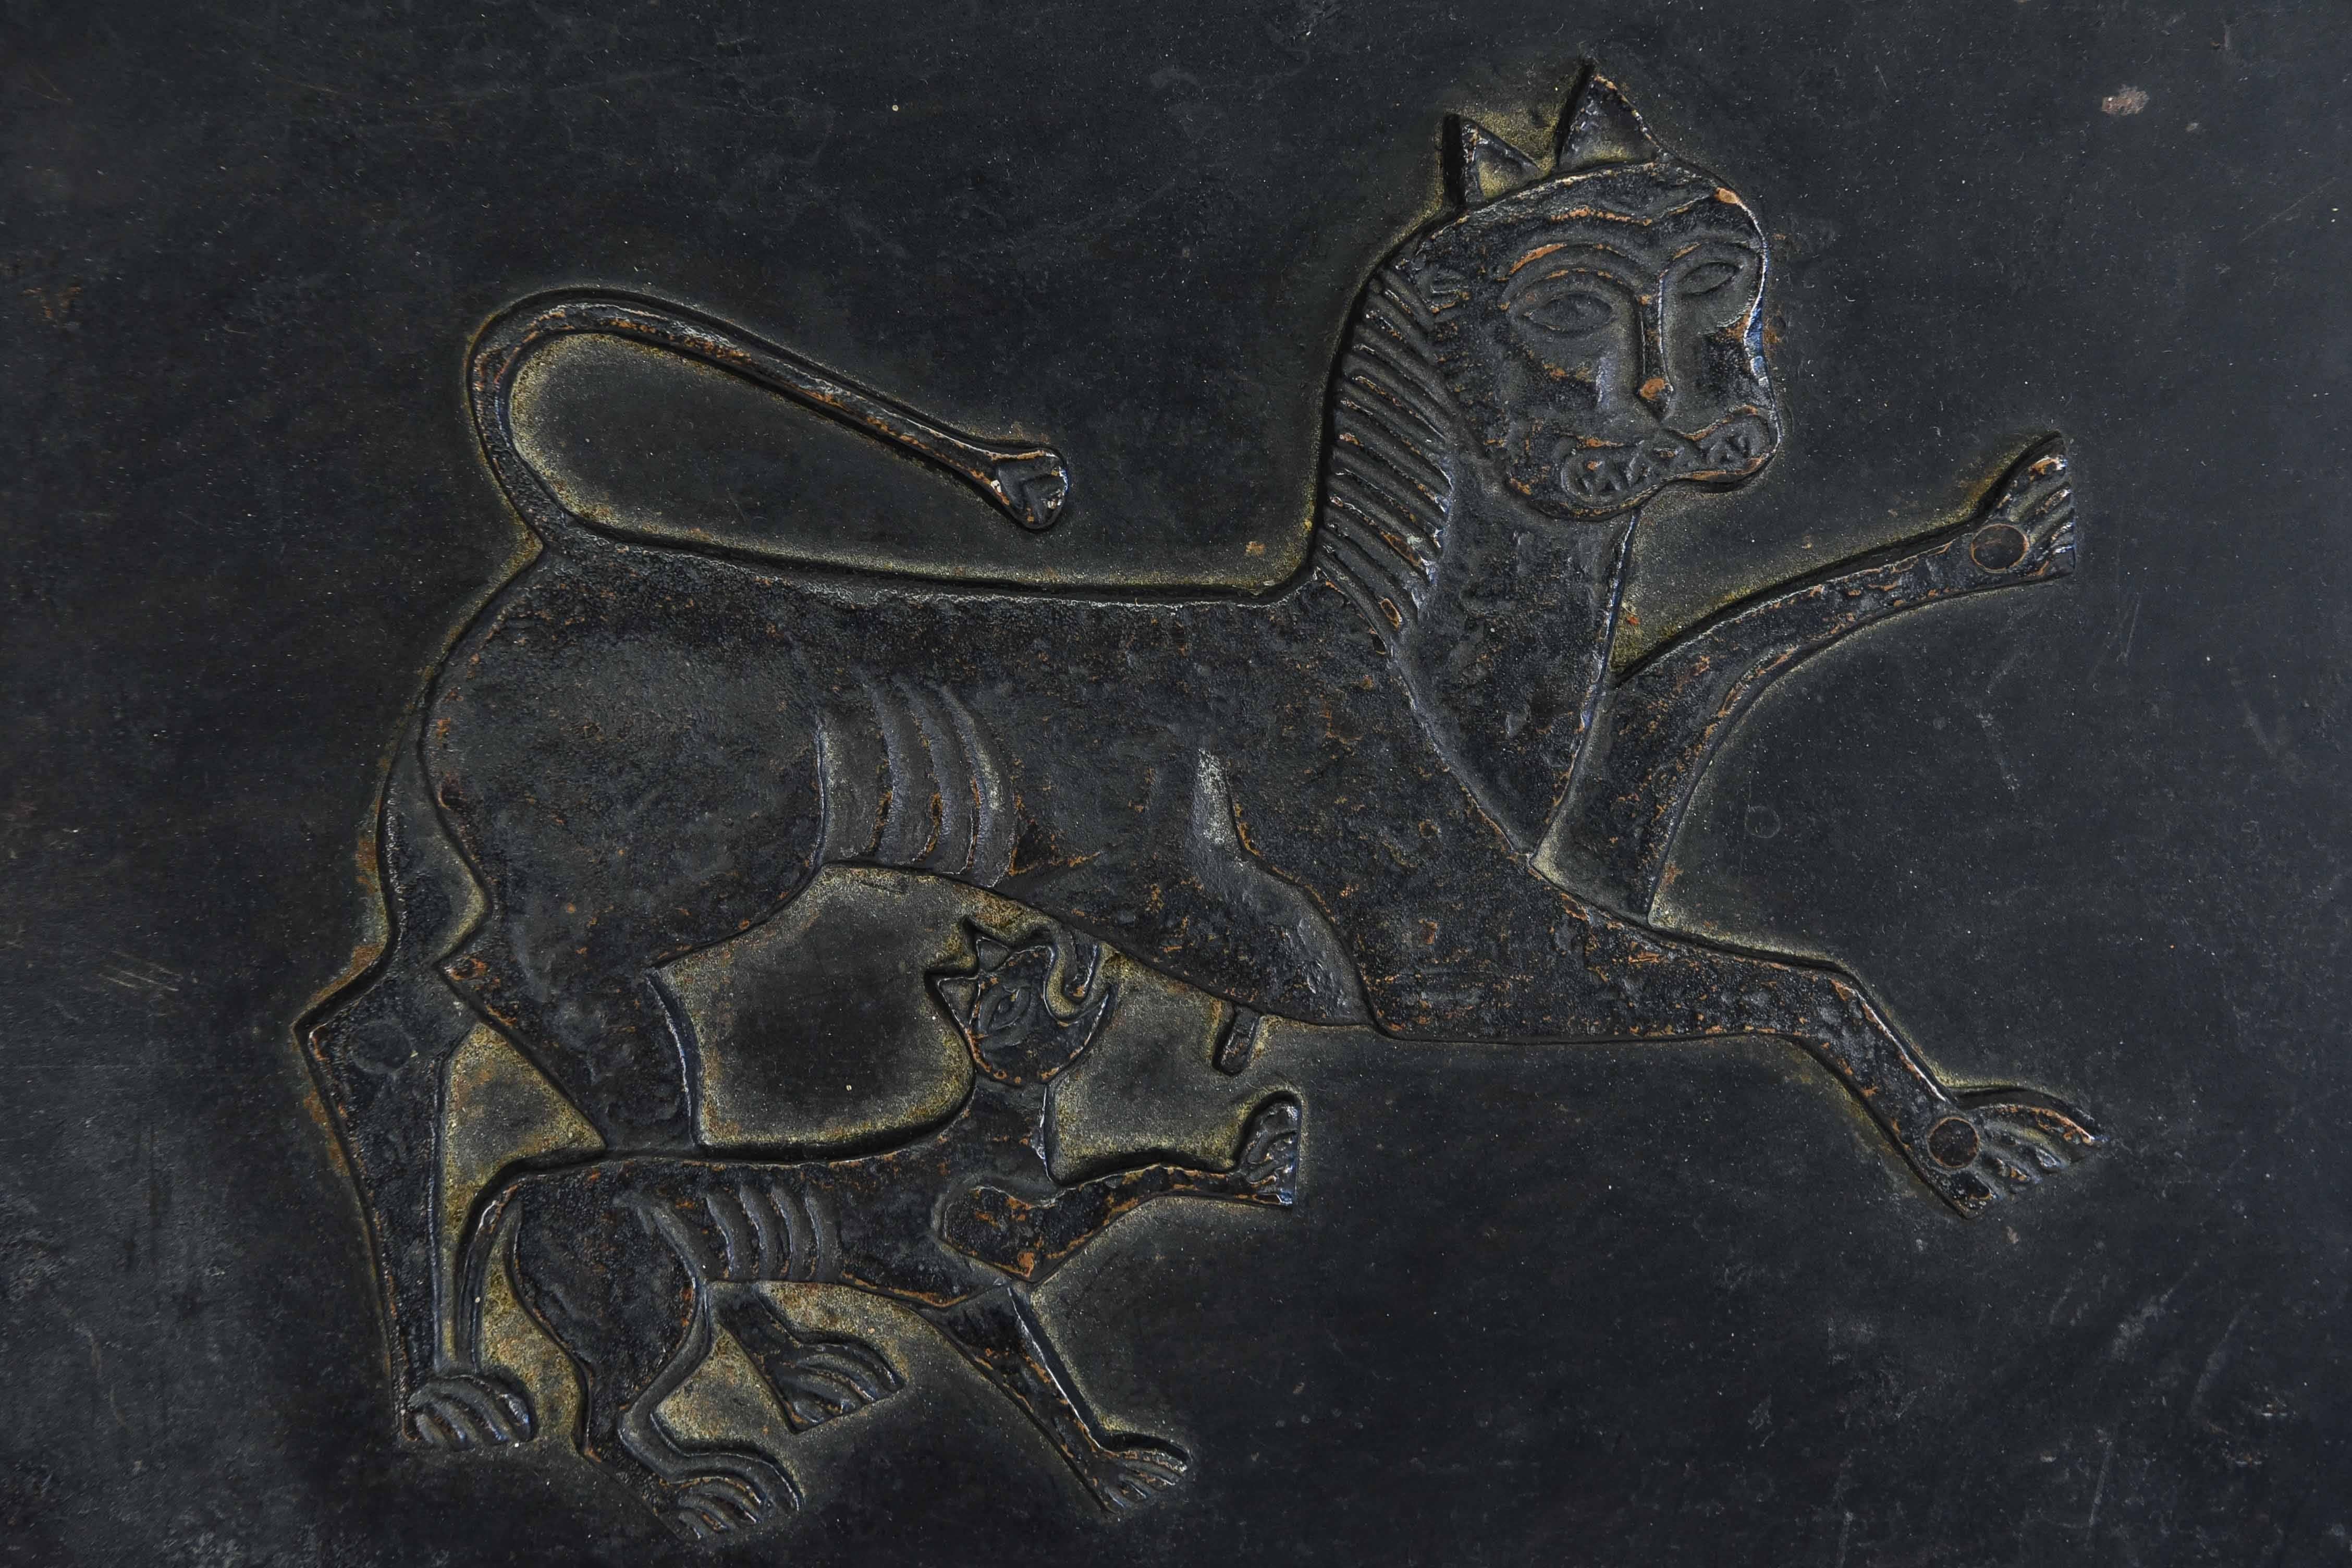 A Czechoslovakian hammered copper and steel photo album depicting a feline and cub on the front. Hallmarked on binding side with glyphs and the letters OHG.